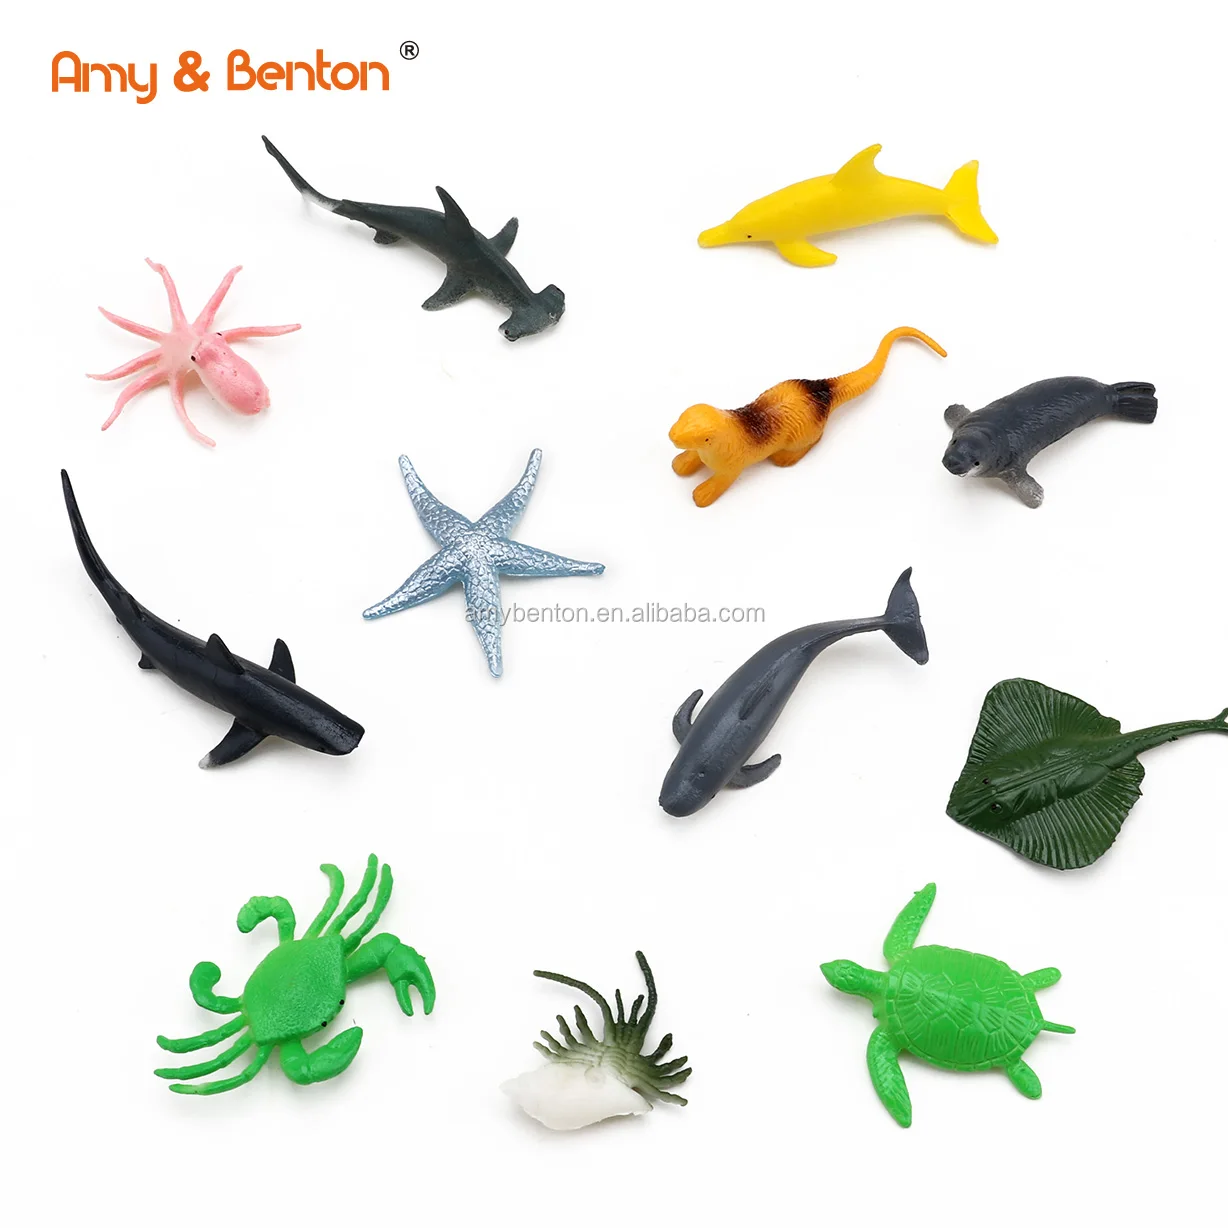 12types Sea Animals Figure Toys,3d Realistic Plastic Marine Toy Figures, Ocean Underwater Creatures Action Models - Buy Sea Ocean Animal,3d Animal  Model,Realistic Animal Toy Product on 